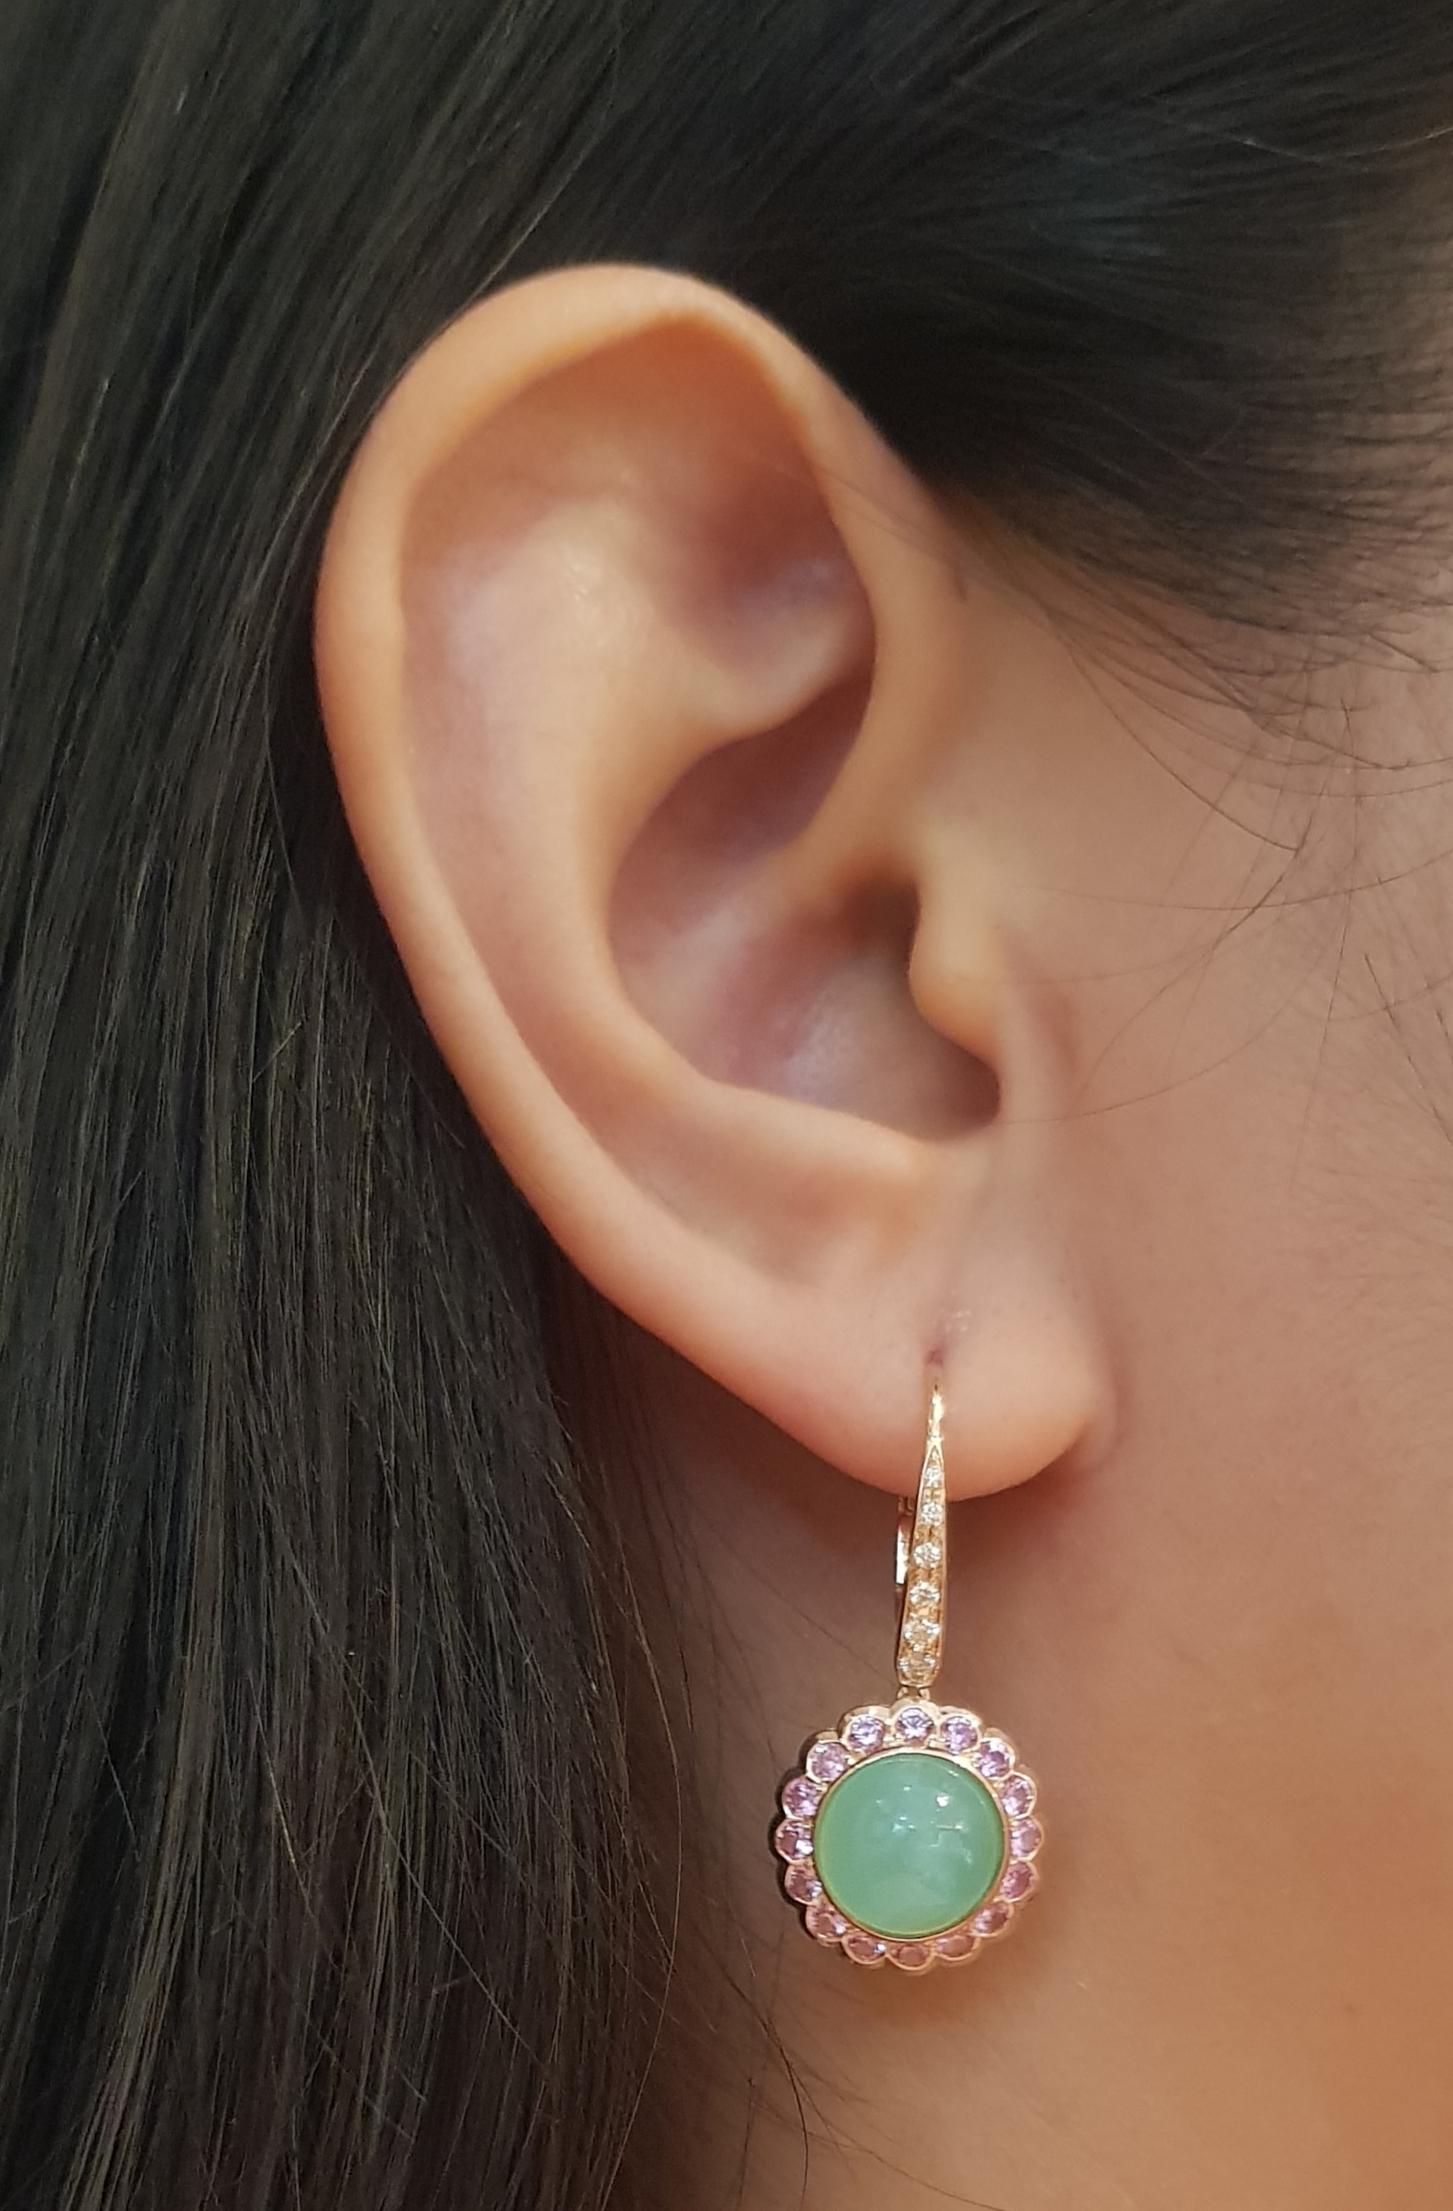 Chrysoprase 6.64 carats, Pink Sapphire 1.15 carats and Diamond 0.12 carat Earrings set in 18K Rose Gold Settings

Width: 1.5 cm 
Length: 2.5 cm
Total Weight: 6.91 grams

